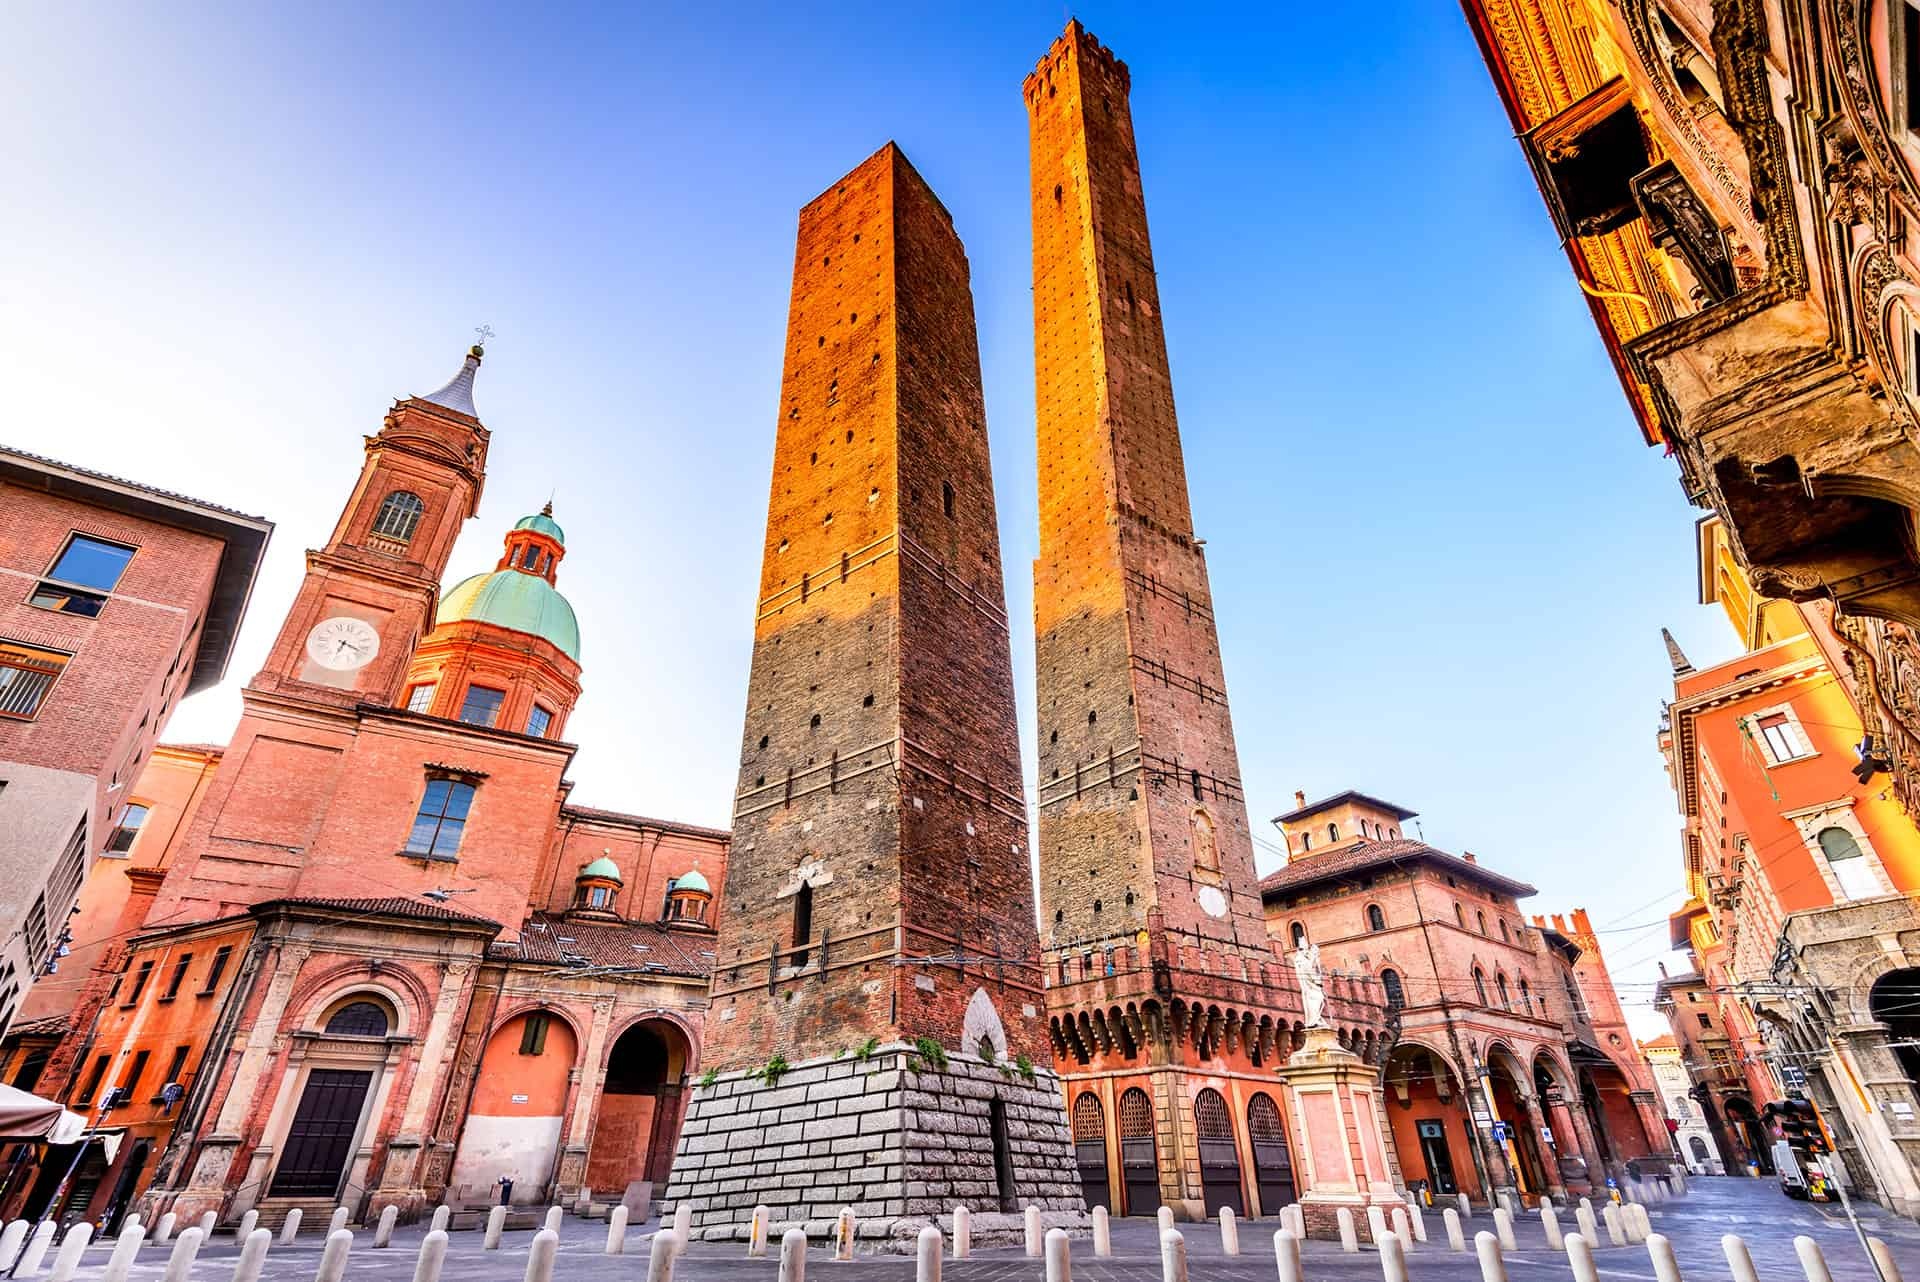 Tour of towers, Medieval architecture, Dreamsha experience, Bologna travel, 1920x1290 HD Desktop